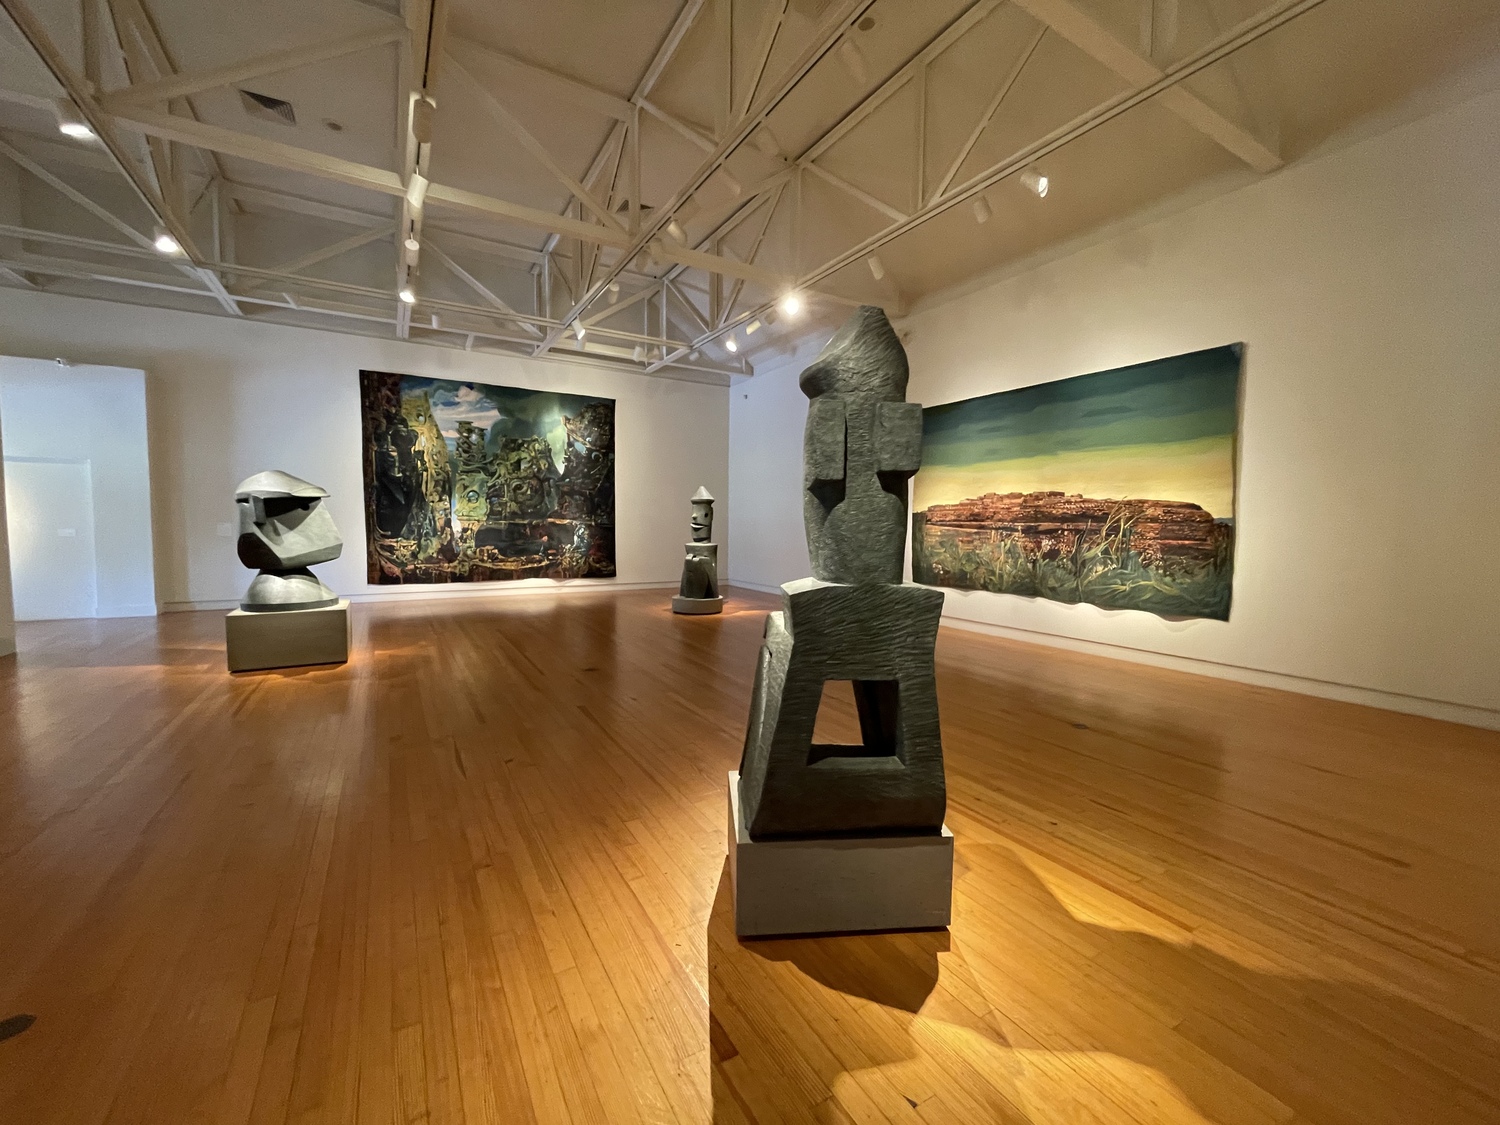 An installation view of Maui Arts & Cultural Center's exhibition “Max Ernst: Surreal Mindscapes & Characters” featuring work from the collection of Eric Ernst, the artist's grandson and a longtime East End resident. ERIC ERNST PHOTO